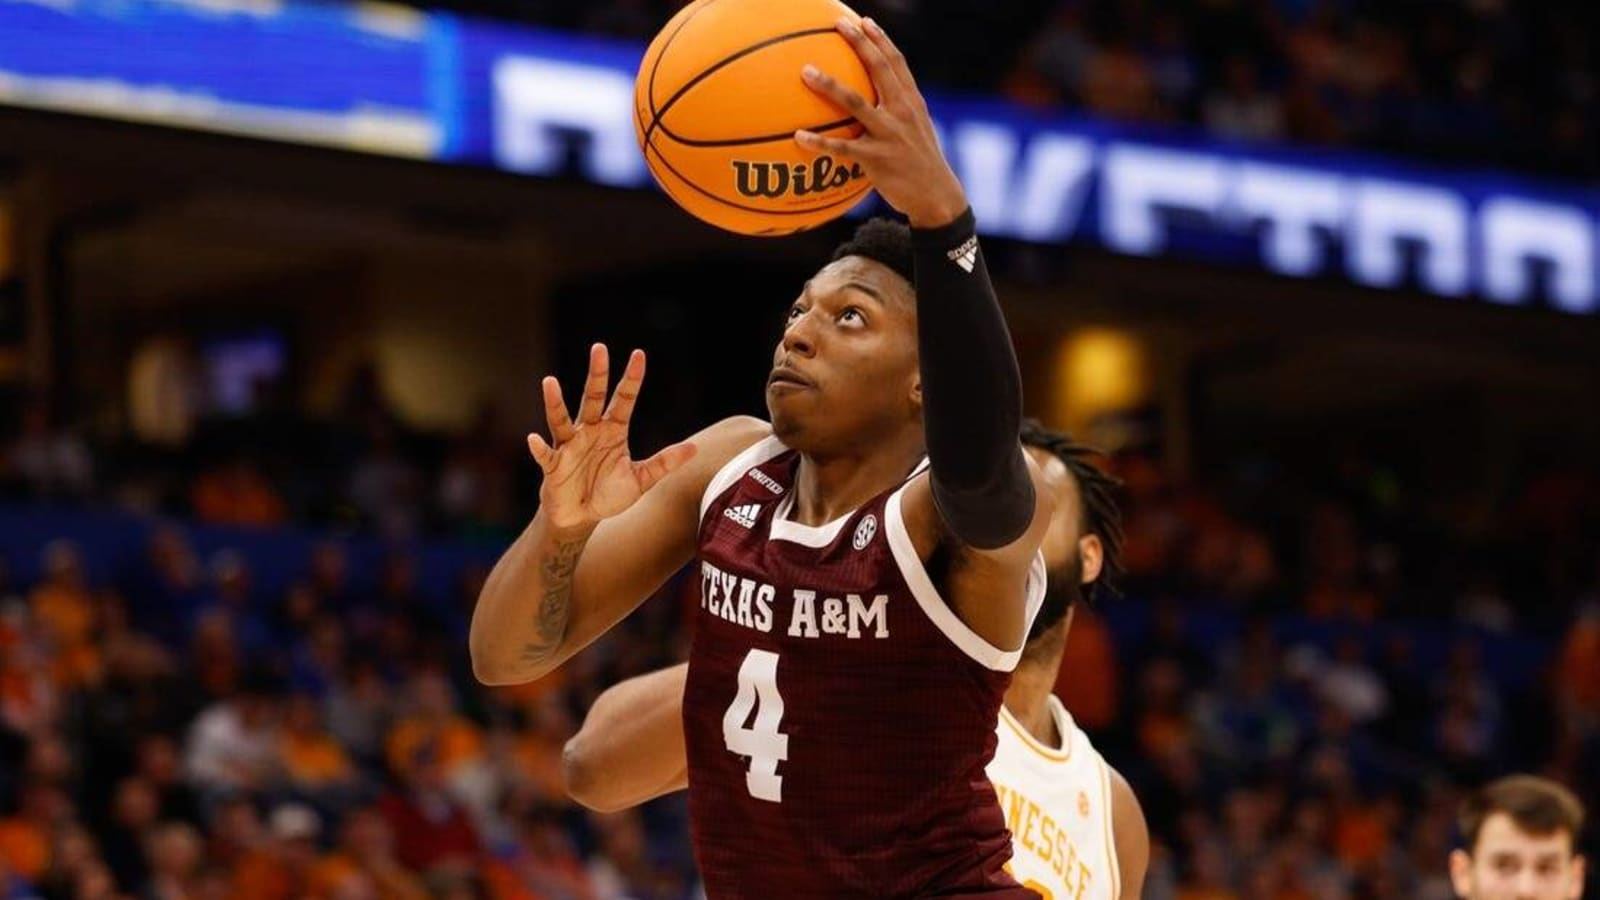 Back on track, Texas A&M faces Boise State next